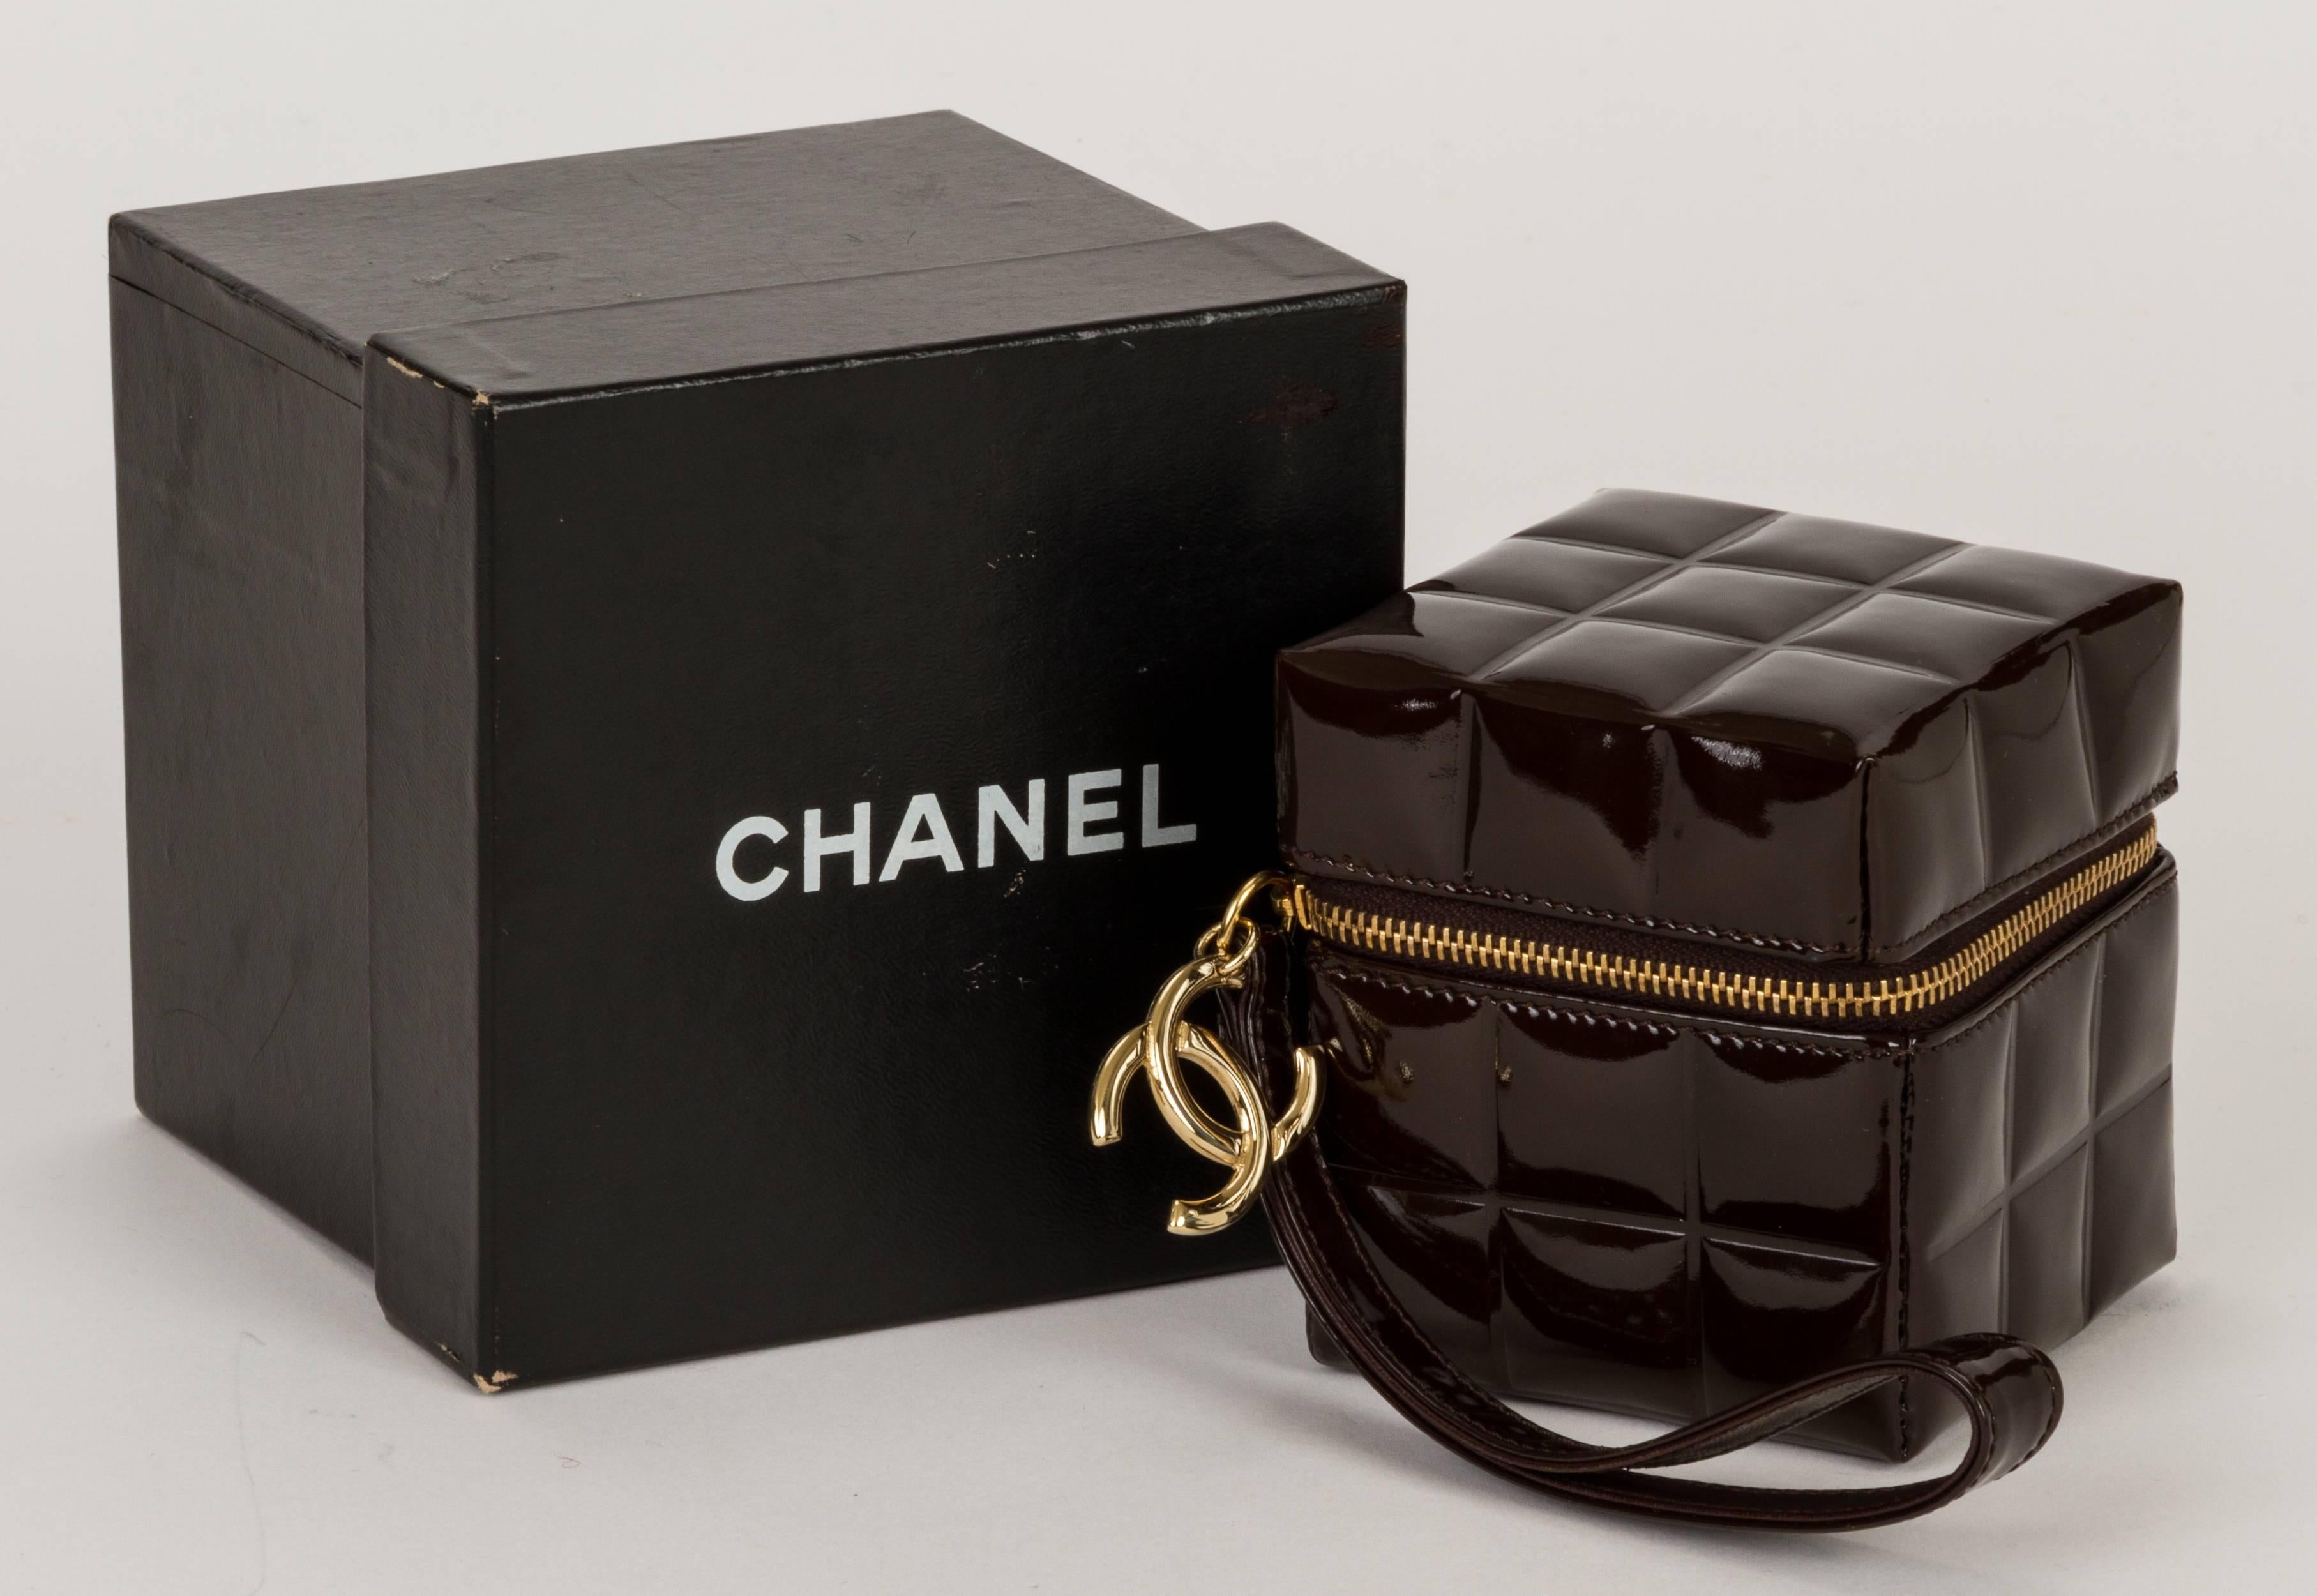 Chanel dark brown patent leather evening cube bag with suede interiors. Comes with original ID card and box.